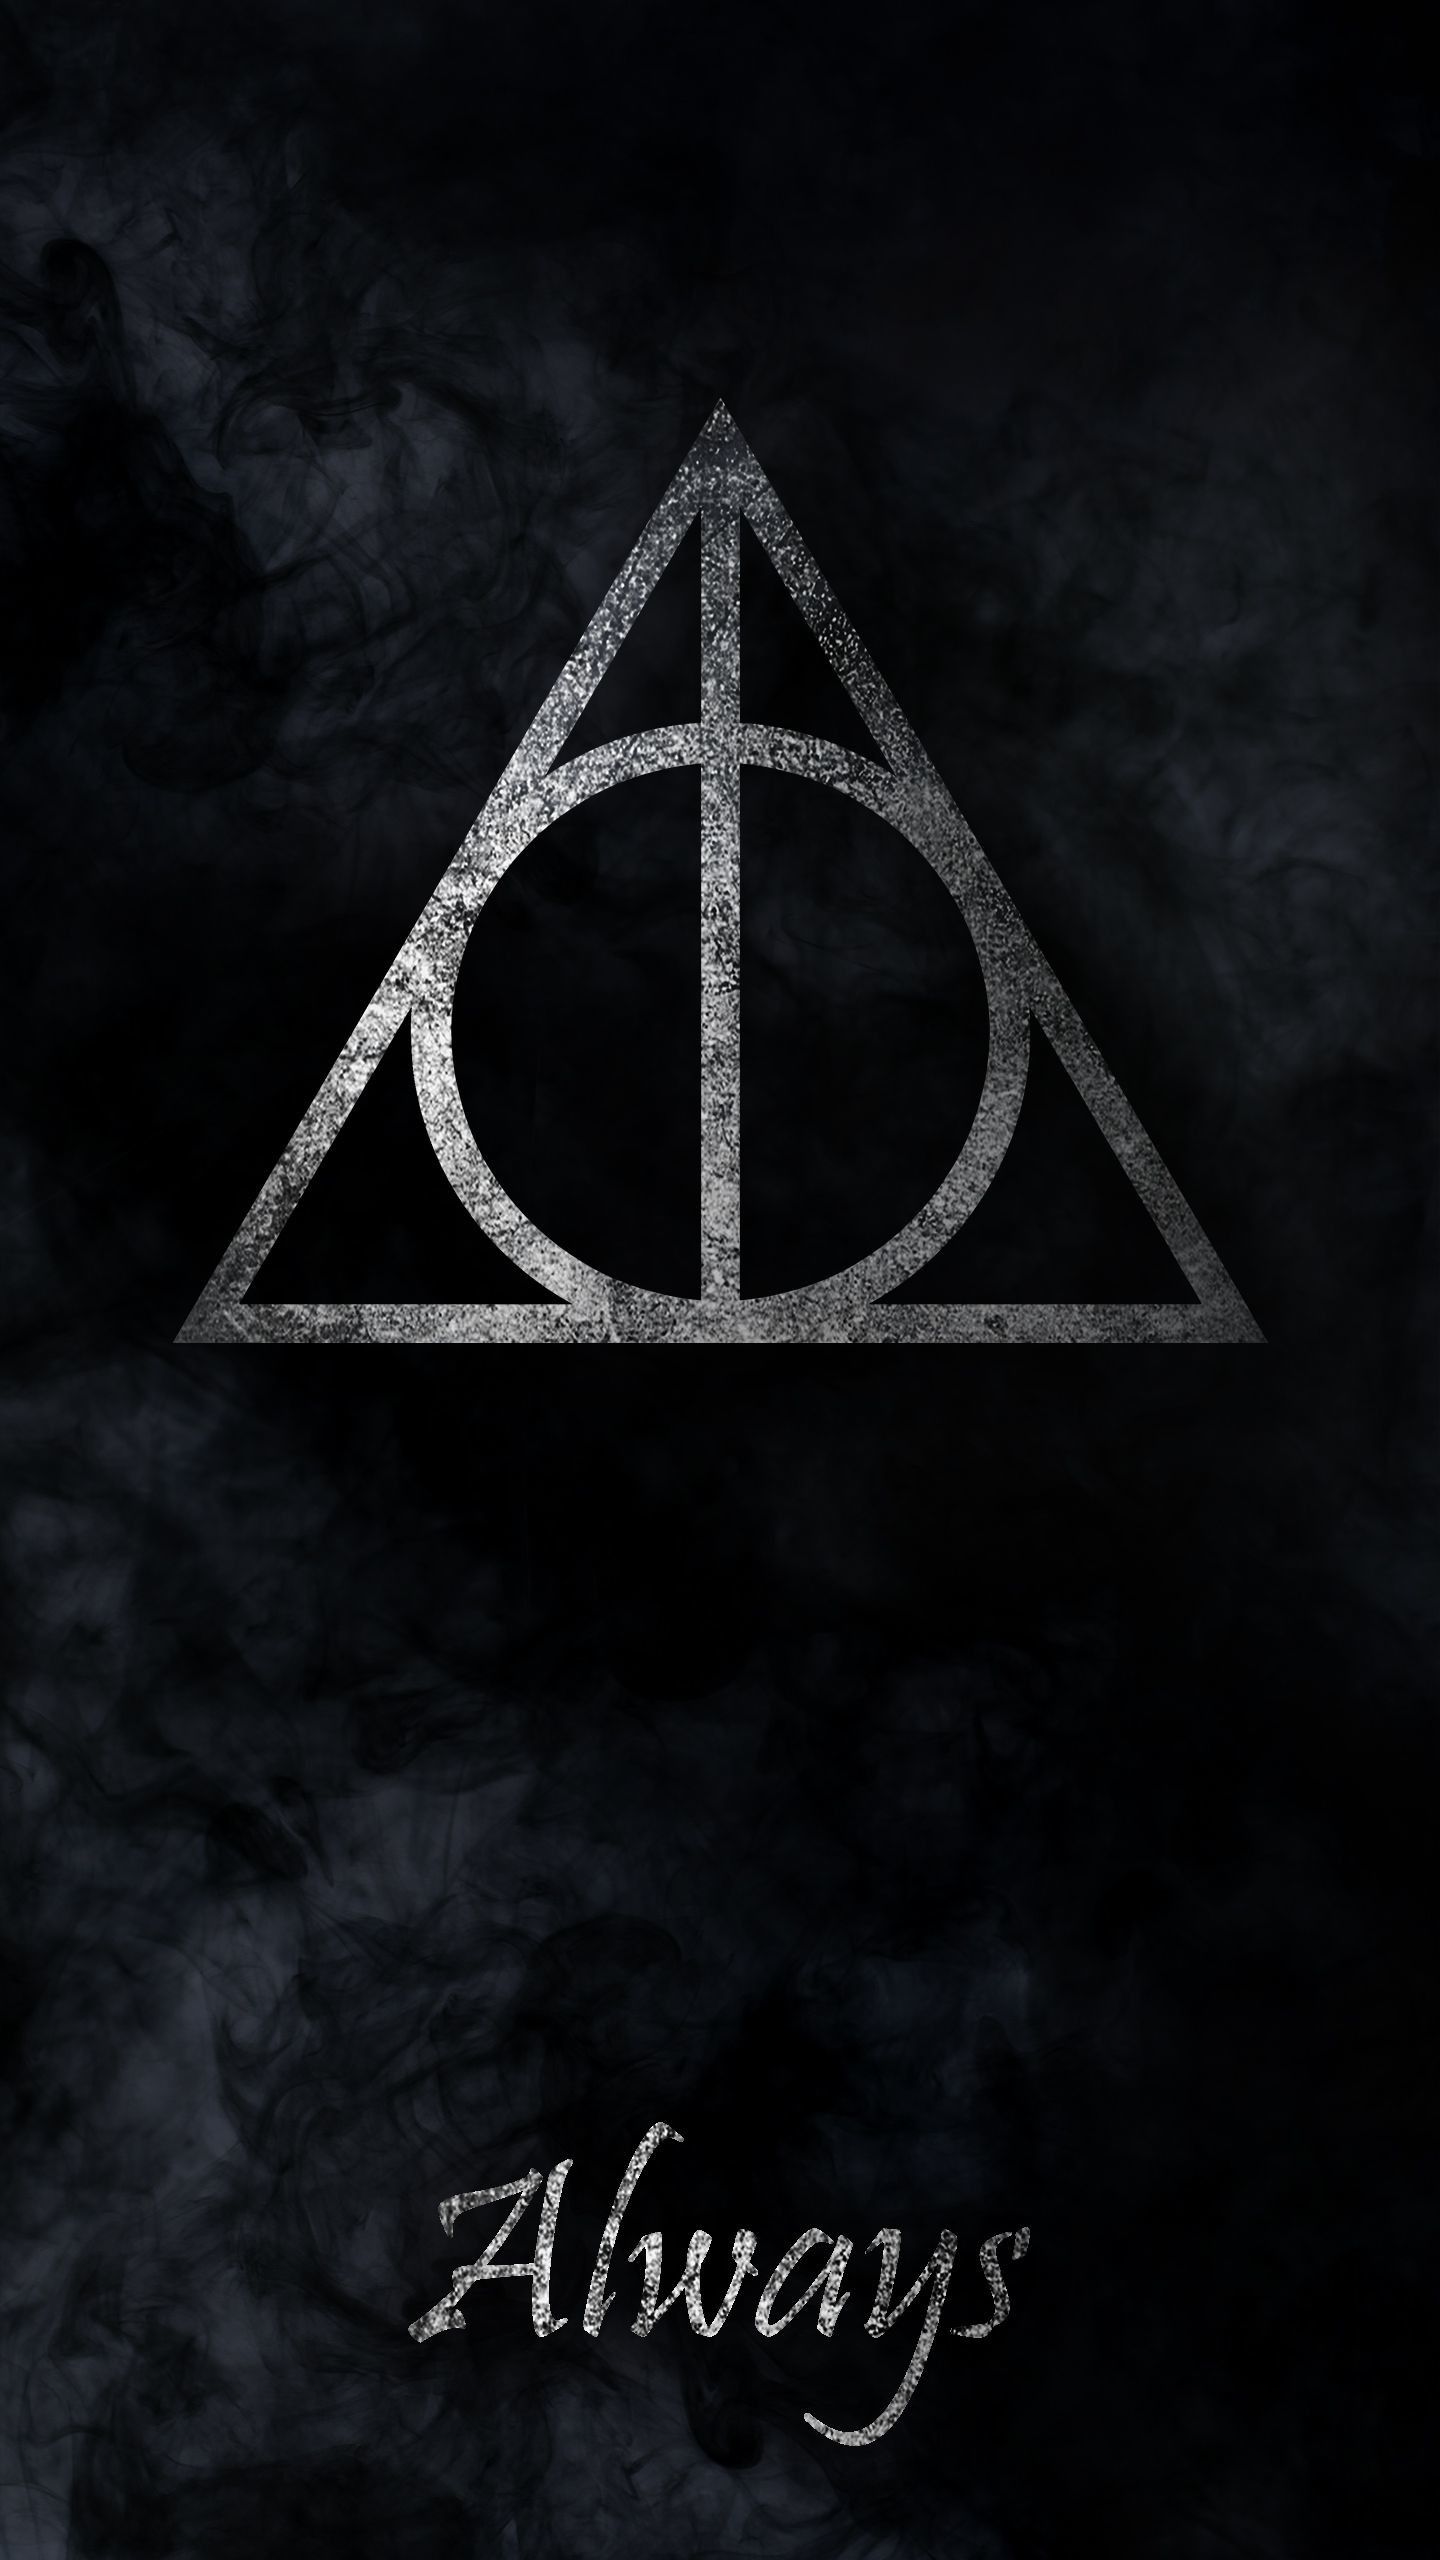 Minimal Harry Potter iPhone wallpapers